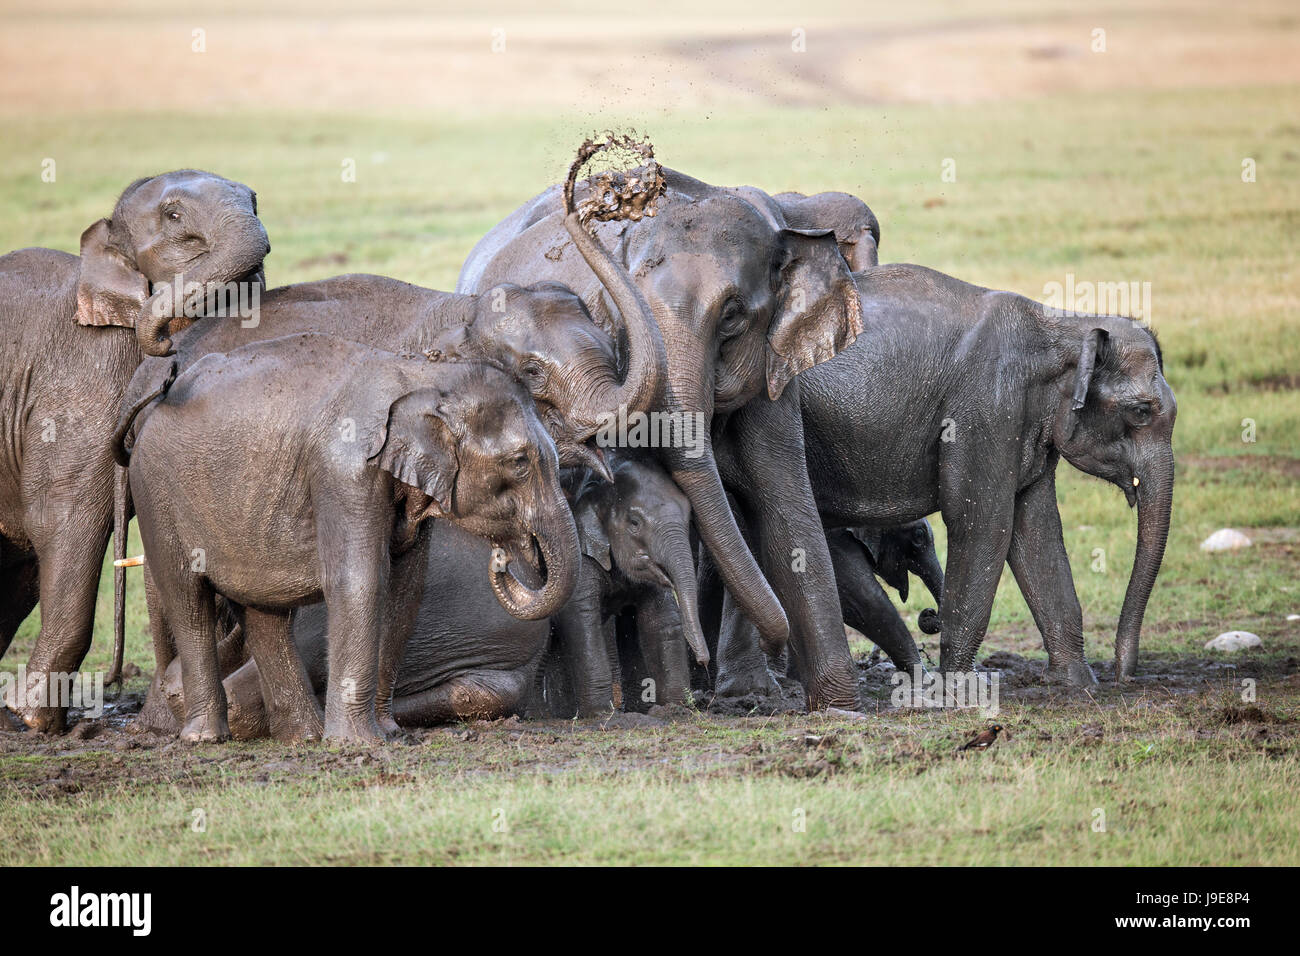 After a family bath these elephants had just emerged with glistening skins, but immediately sprayed mud over themselves. Stock Photo